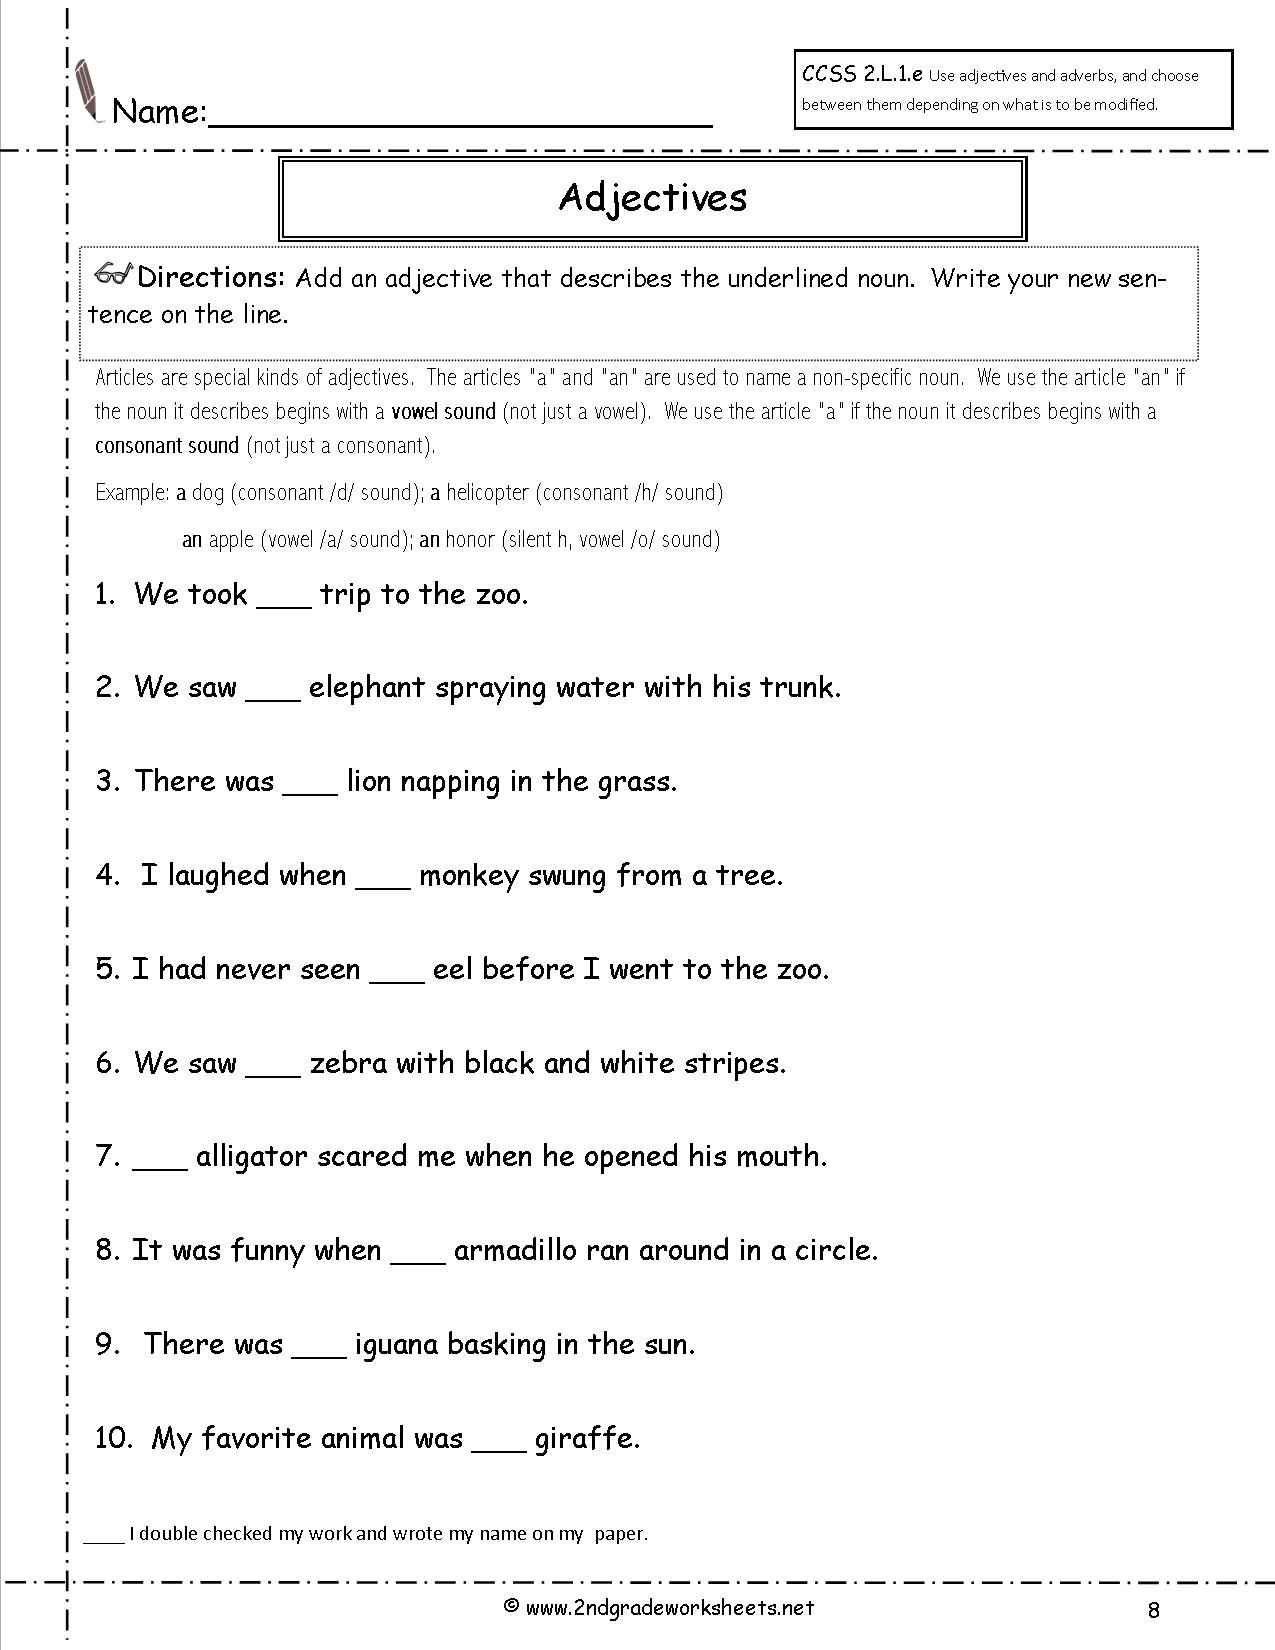 Free Printable Second Grade Worksheets » High School Worksheets - Free Printable Grammar Worksheets For Highschool Students